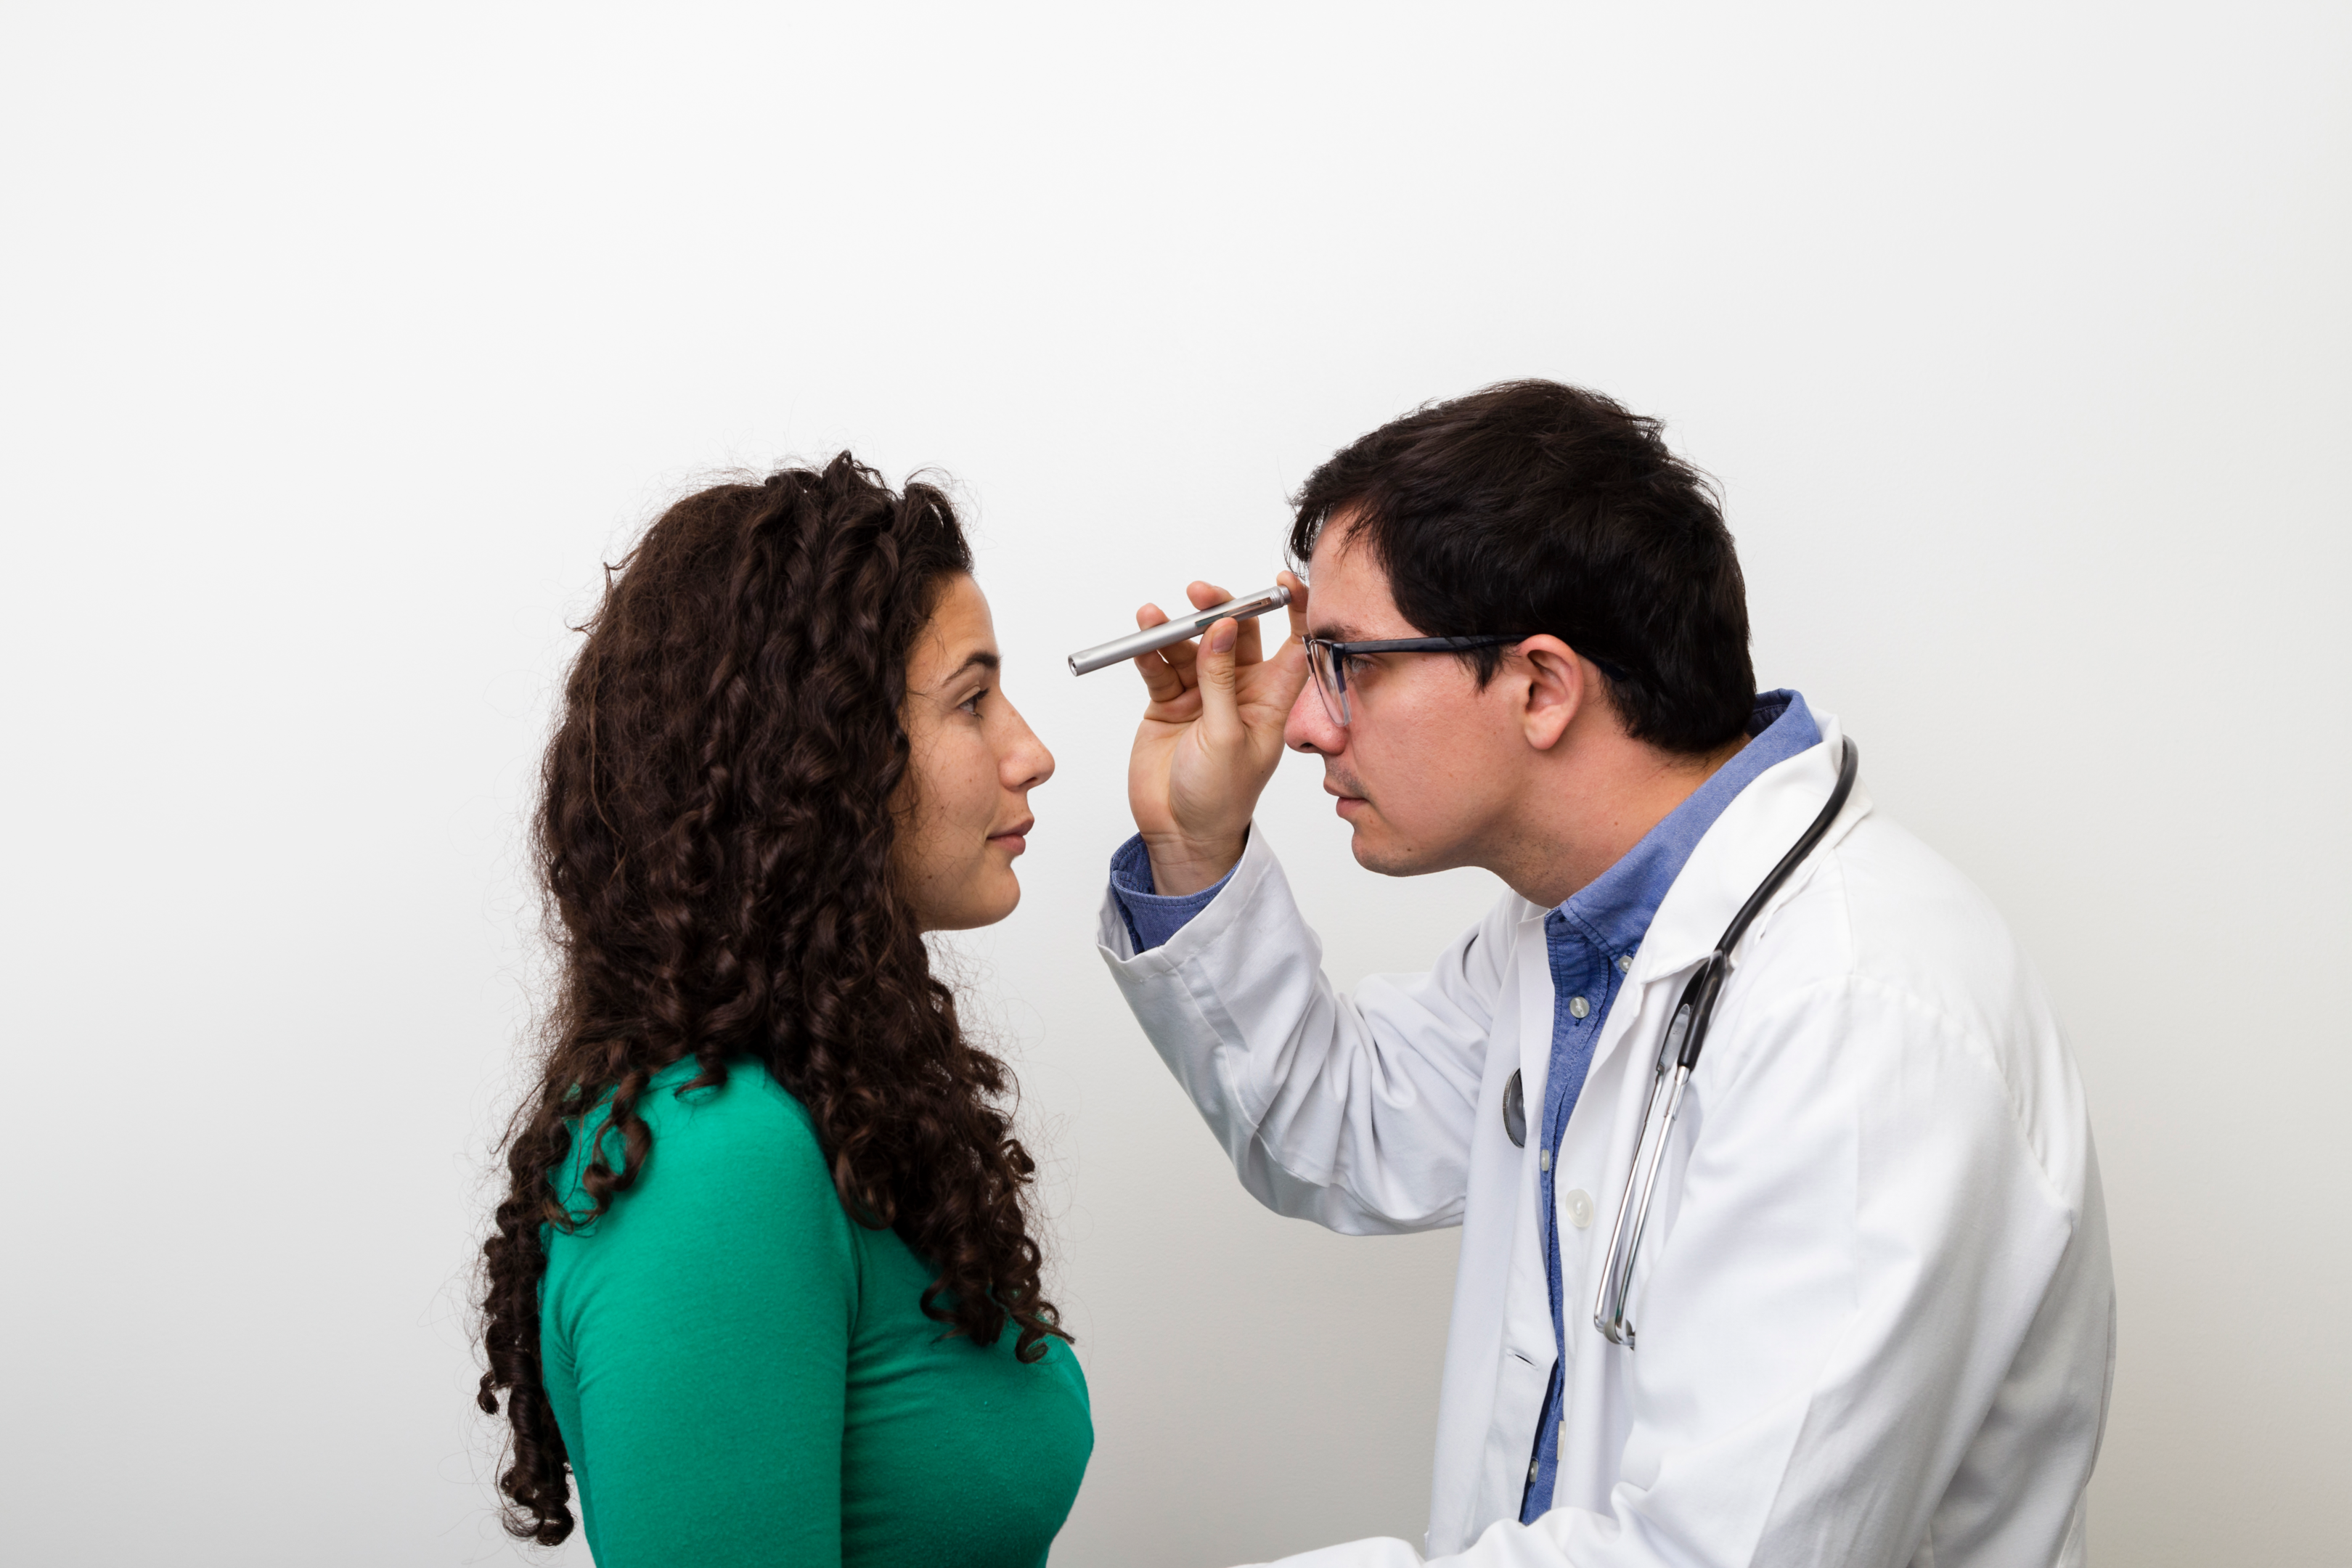 chlamydia in the eye is a sexually transmitted infection 